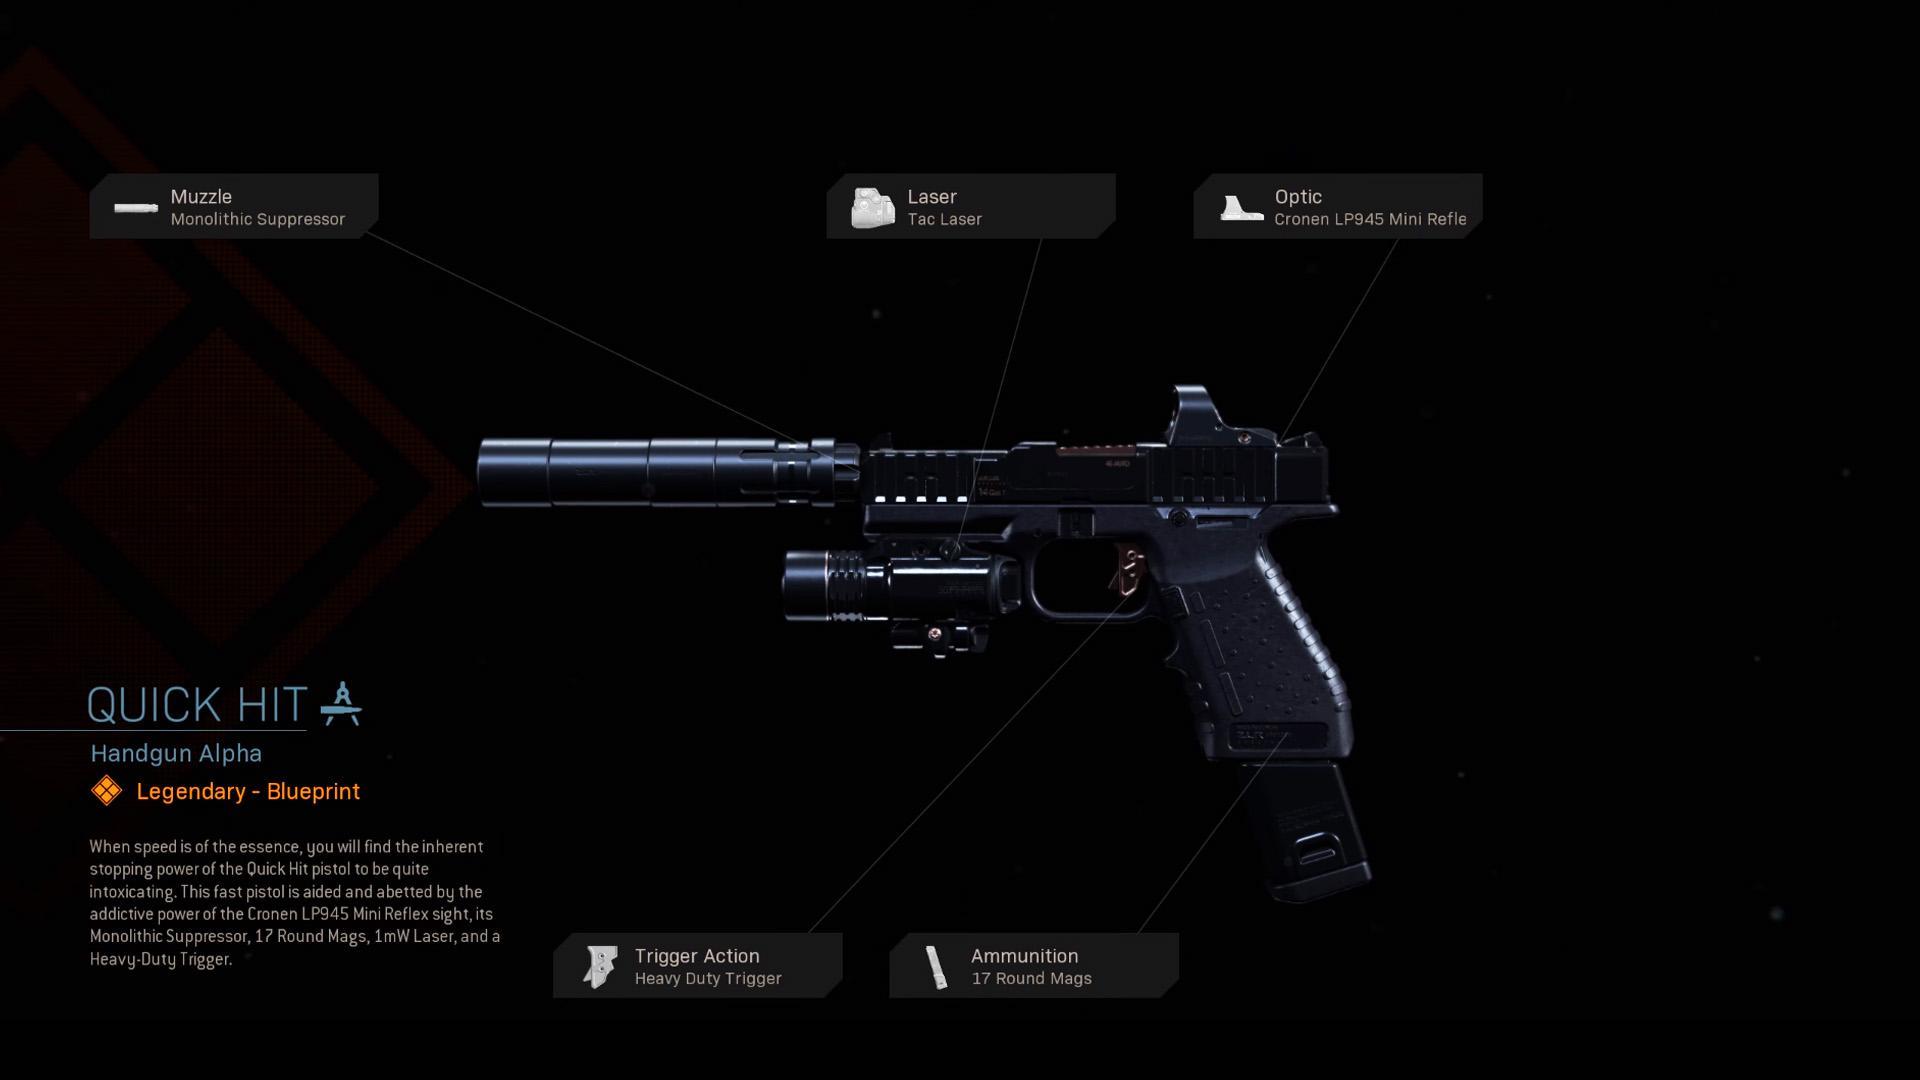 The Quick Hit is a Weapon Blueprint available in Call of Duty: Modern Warfa...